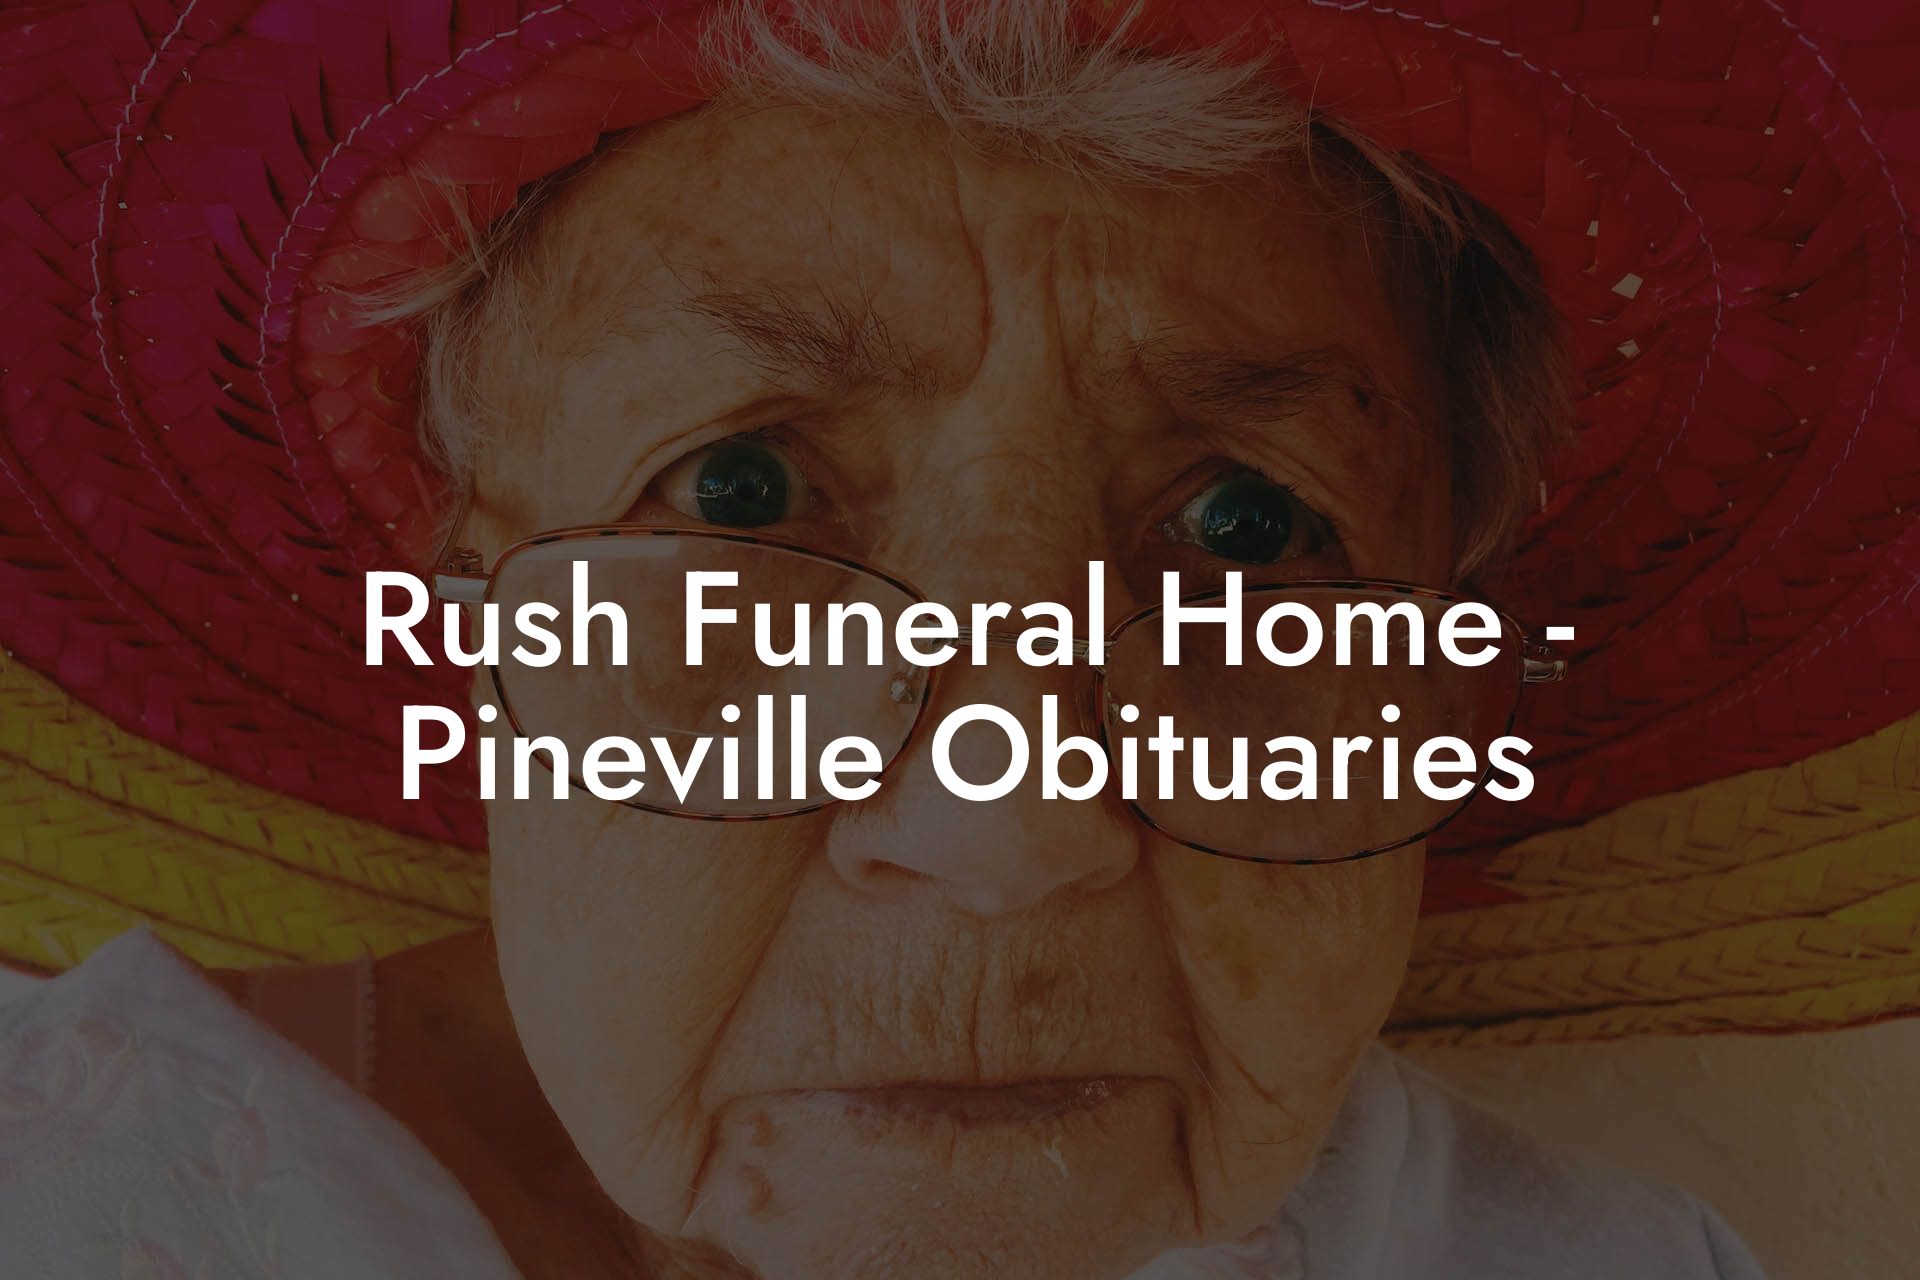 Rush Funeral Home - Pineville Obituaries